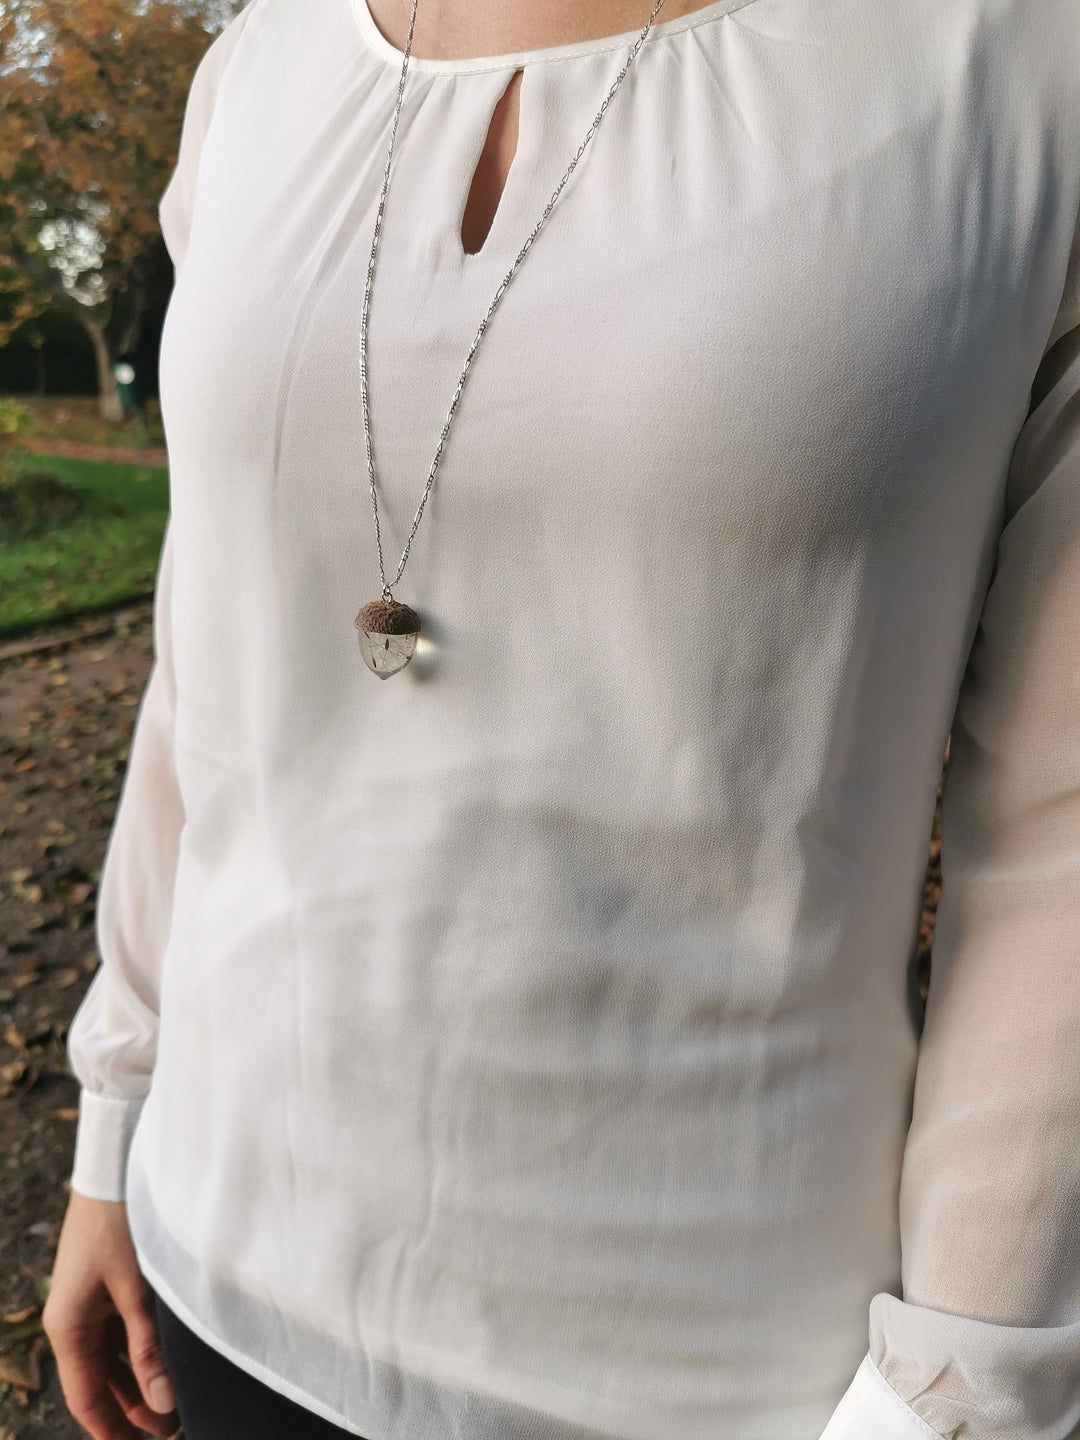 Dandelion filled acorn necklace with leather cord